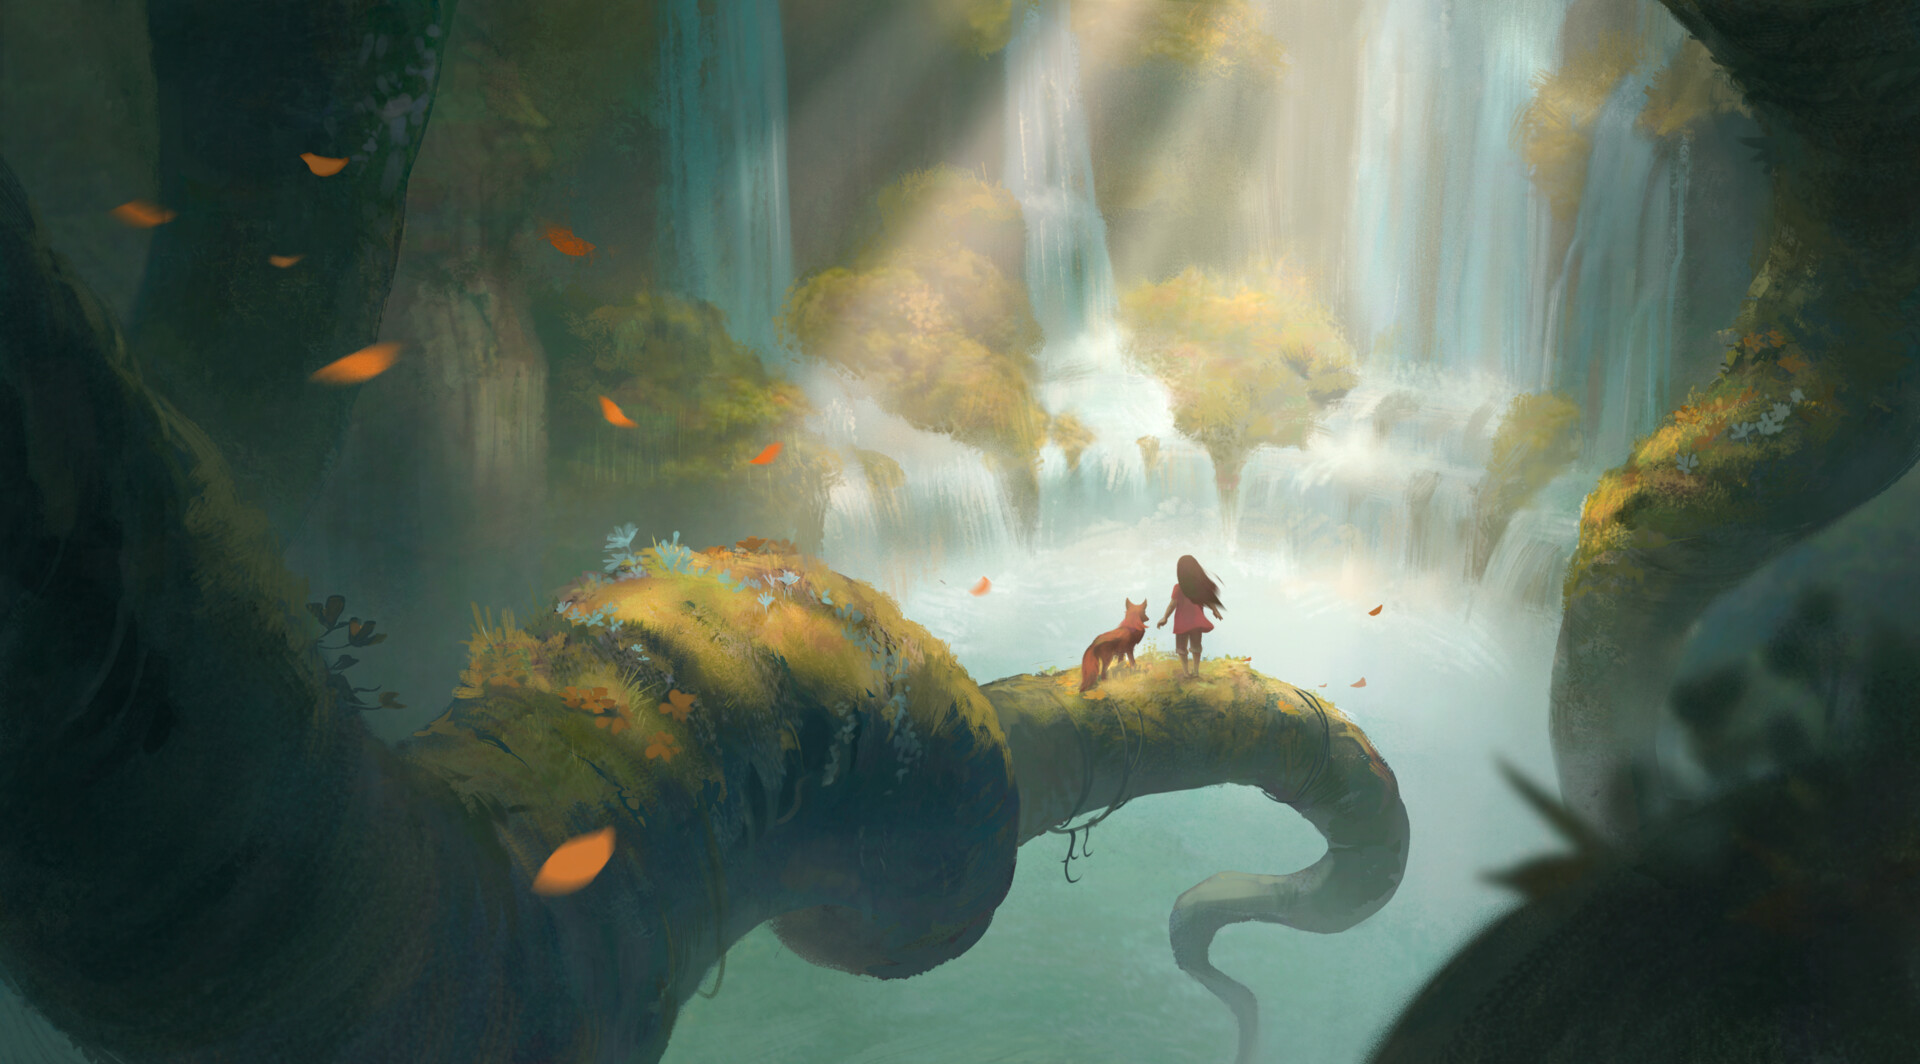 General 1920x1064 concept art digital art environment fox forest surreal fantastic realism sunlight leaves waterfall water animals